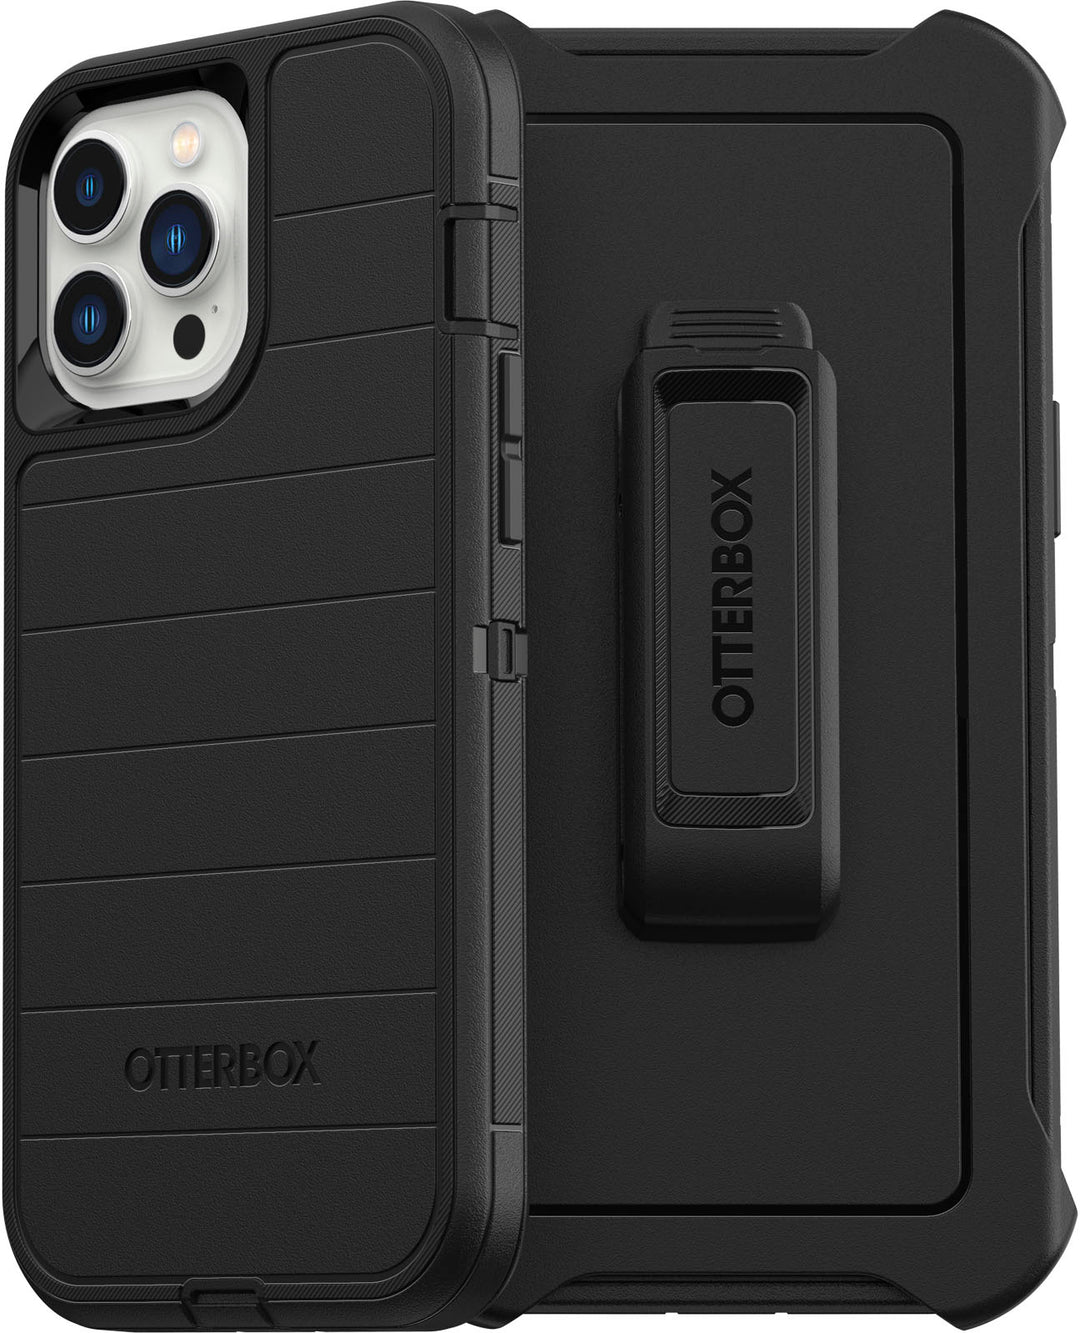 OtterBox - Defender Series Pro Hard Shell for Apple iPhone 13 Pro Max and iPhone 12 Pro Max - Black_1